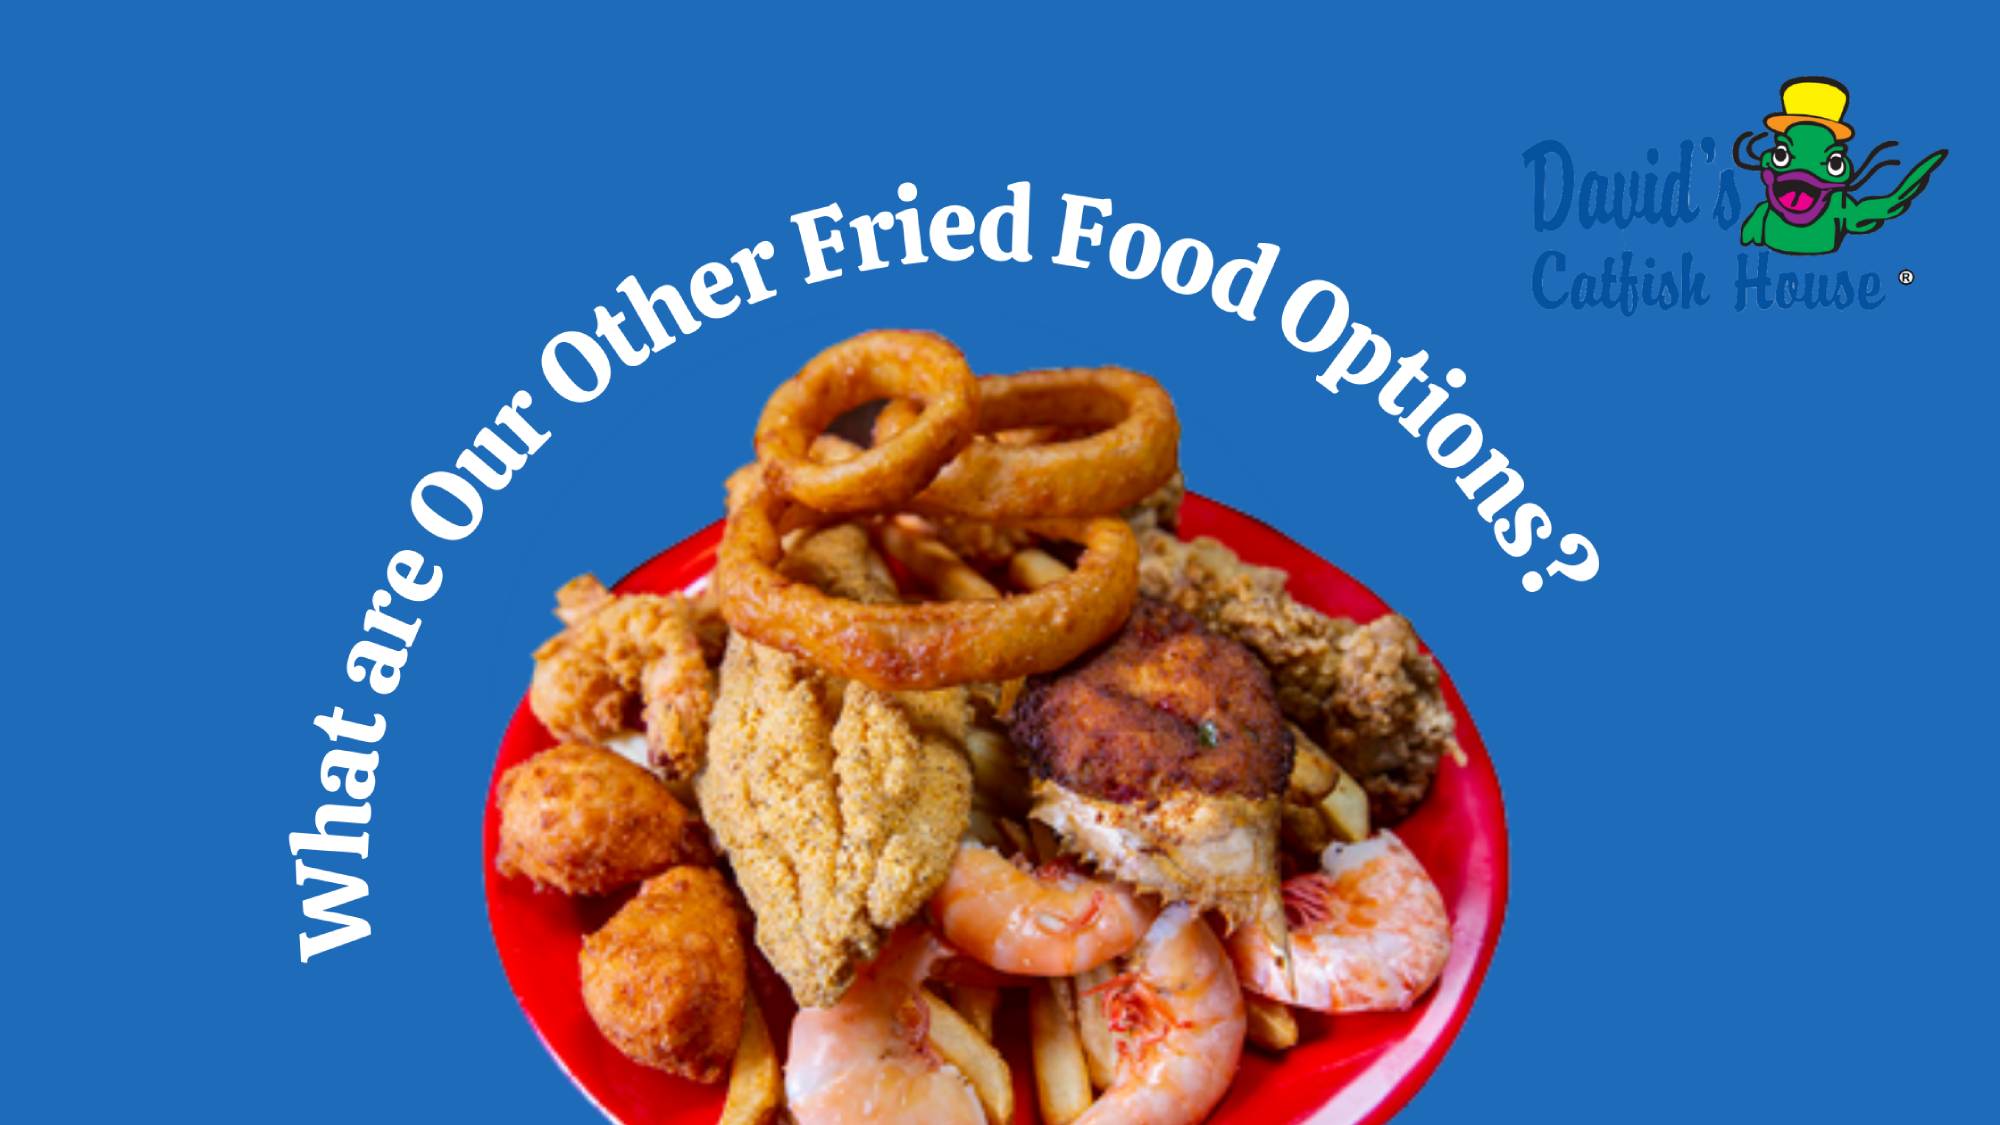 What are Our Other Fried Food Options?